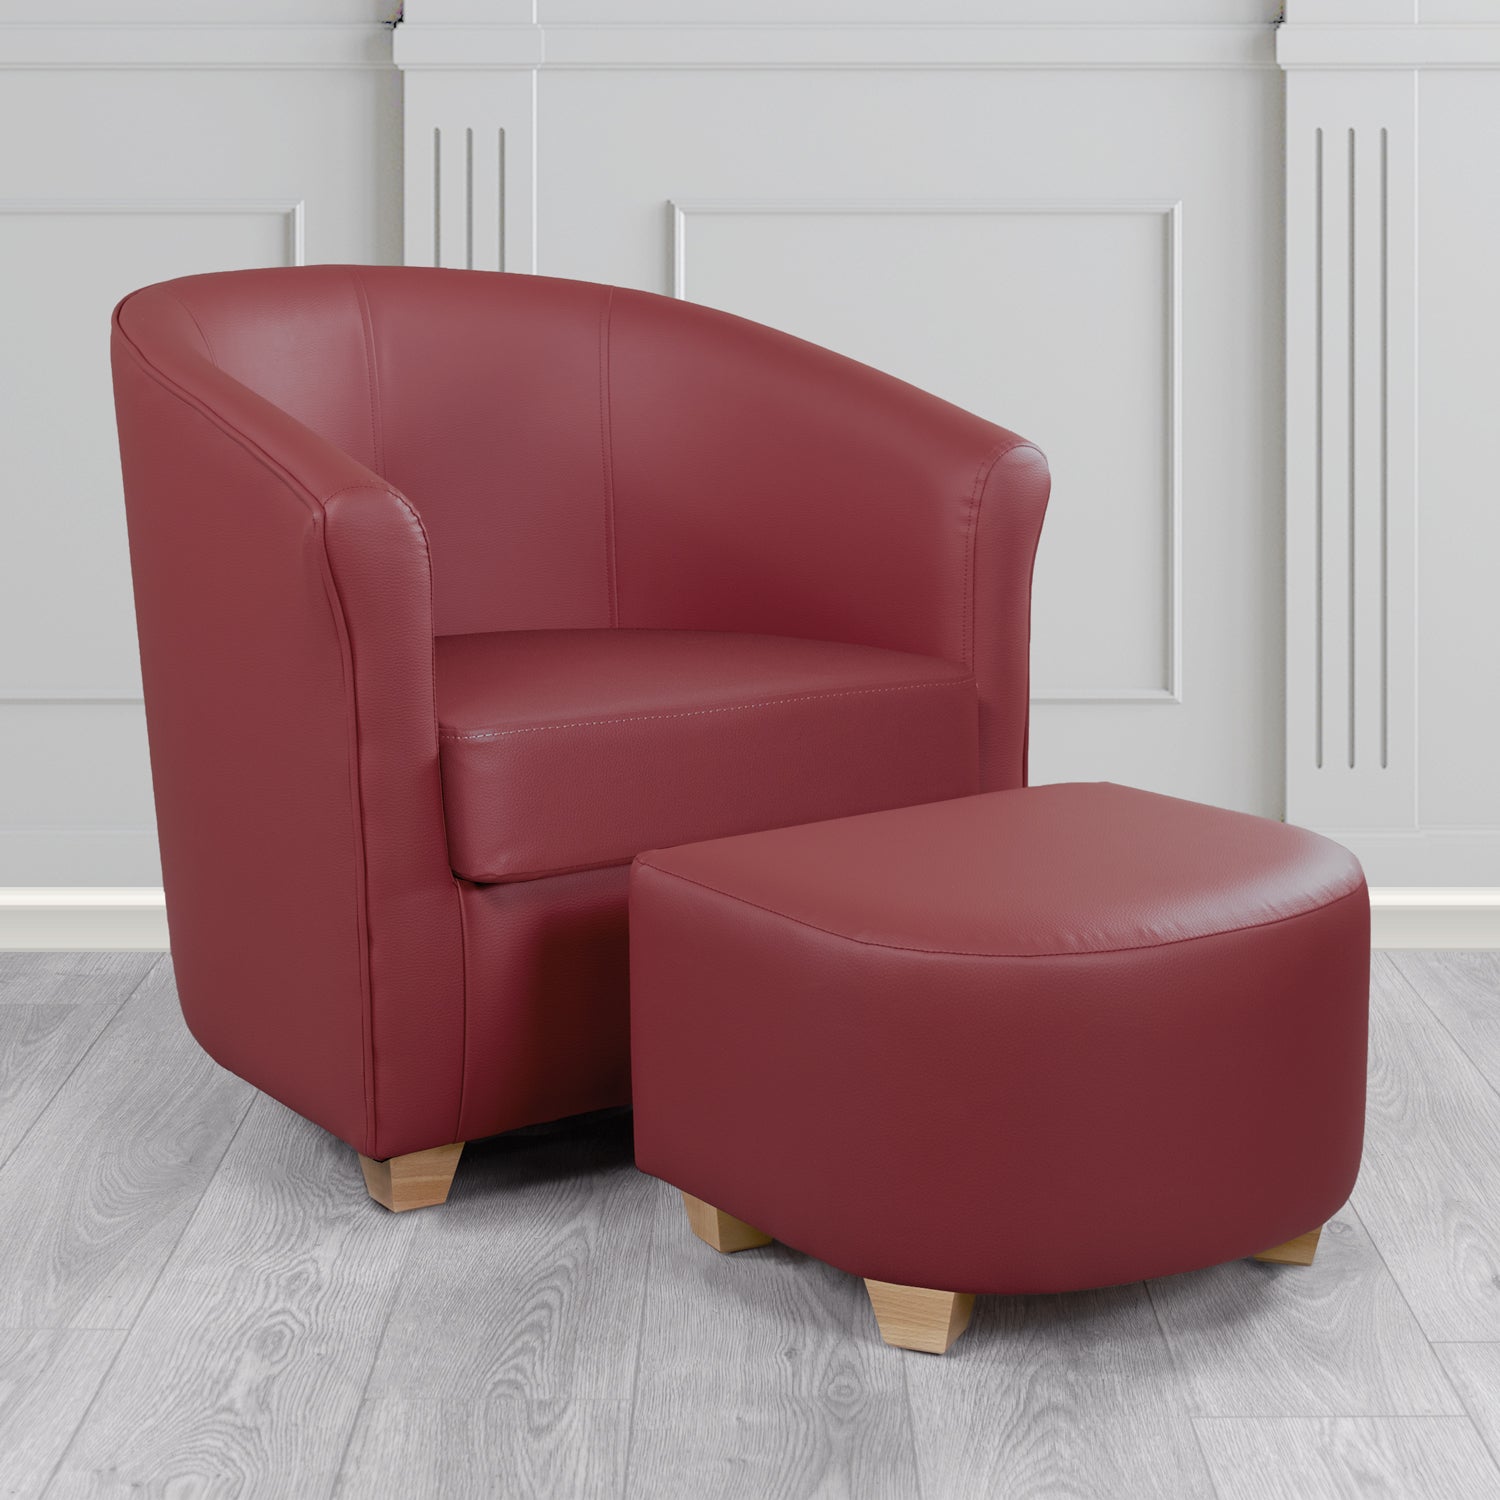 Cannes Tub Chair with Footstool Set in Just Colour Mulled Wine Crib 5 Faux Leather - The Tub Chair Shop